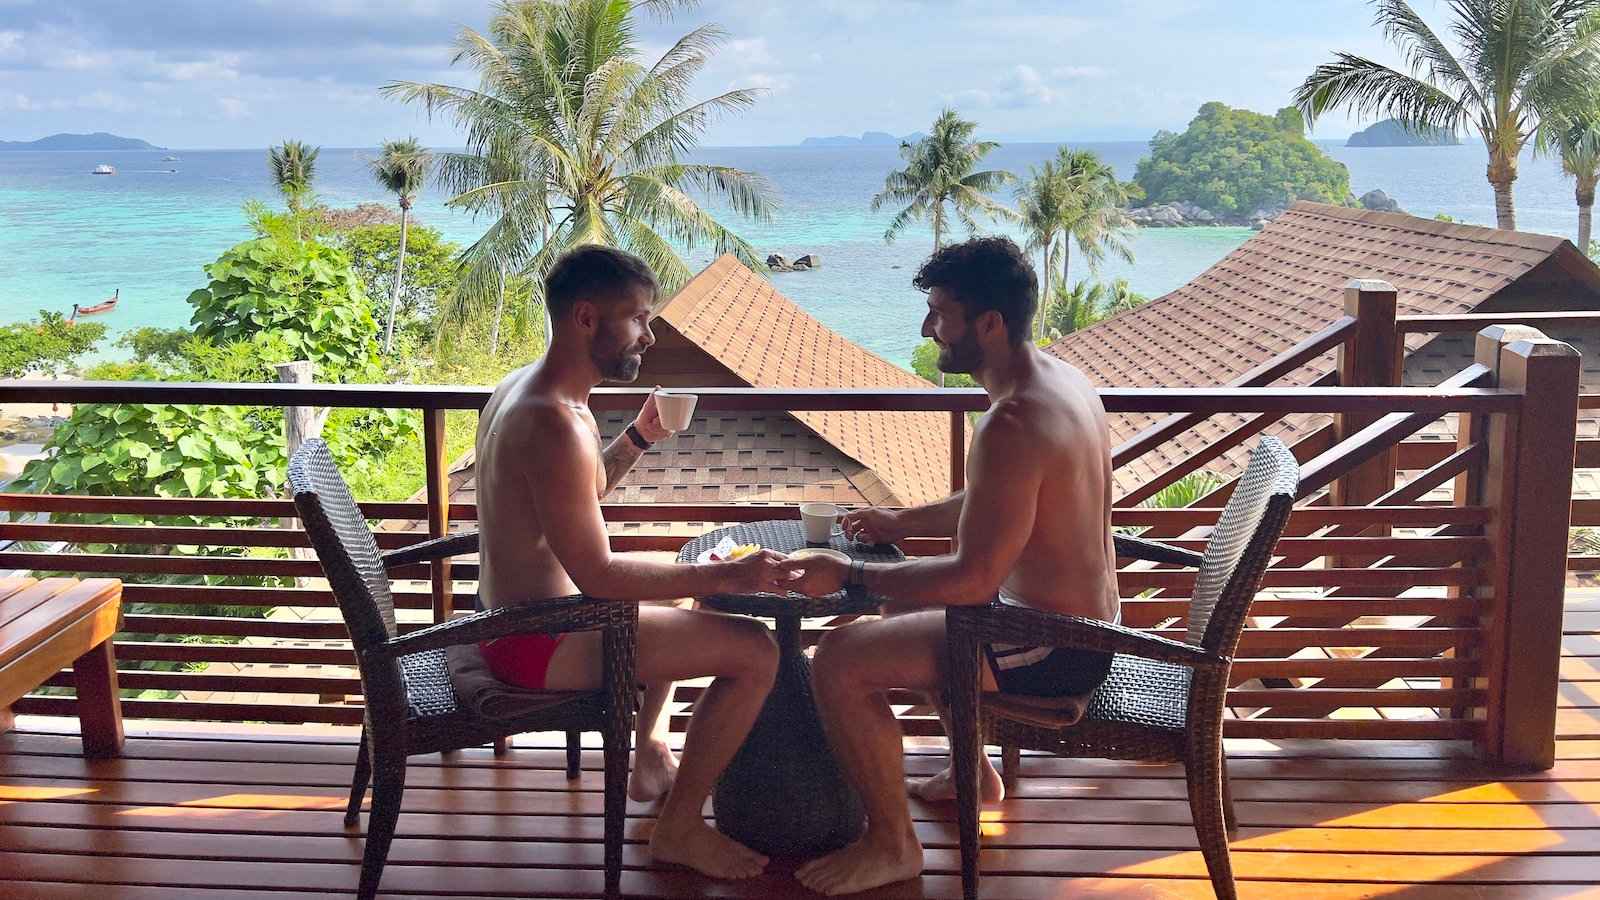 A gay couple enjoying breakfast on the deck at Ten Moons Resort with beach and palm tree views.